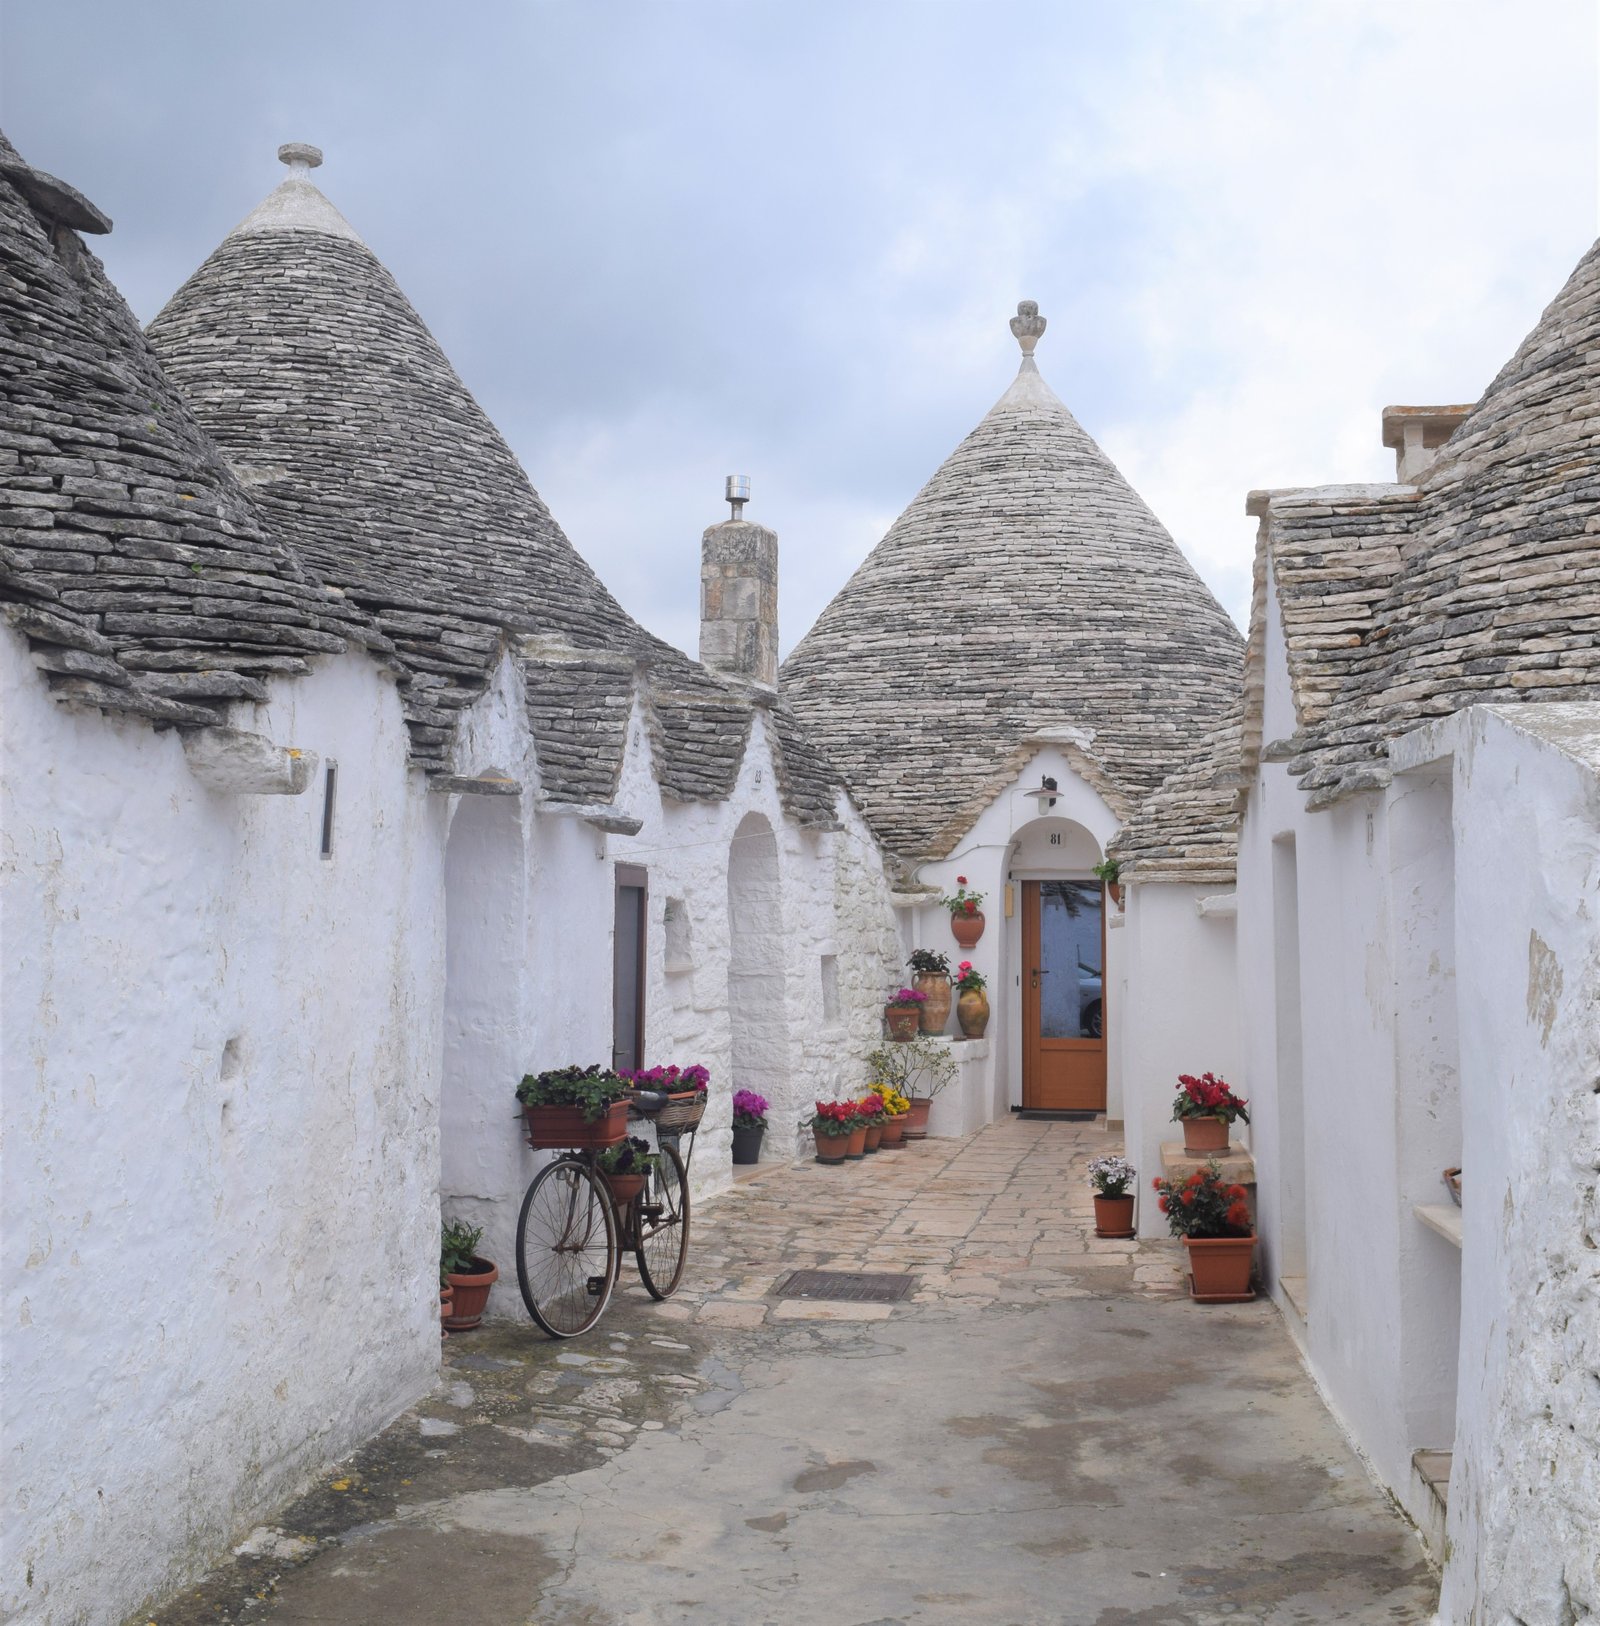 Alberobello, Italy is such an amazing place. A UNESCO World Heritage site and a must see when visiting Puglia. ouritalianjourney.com